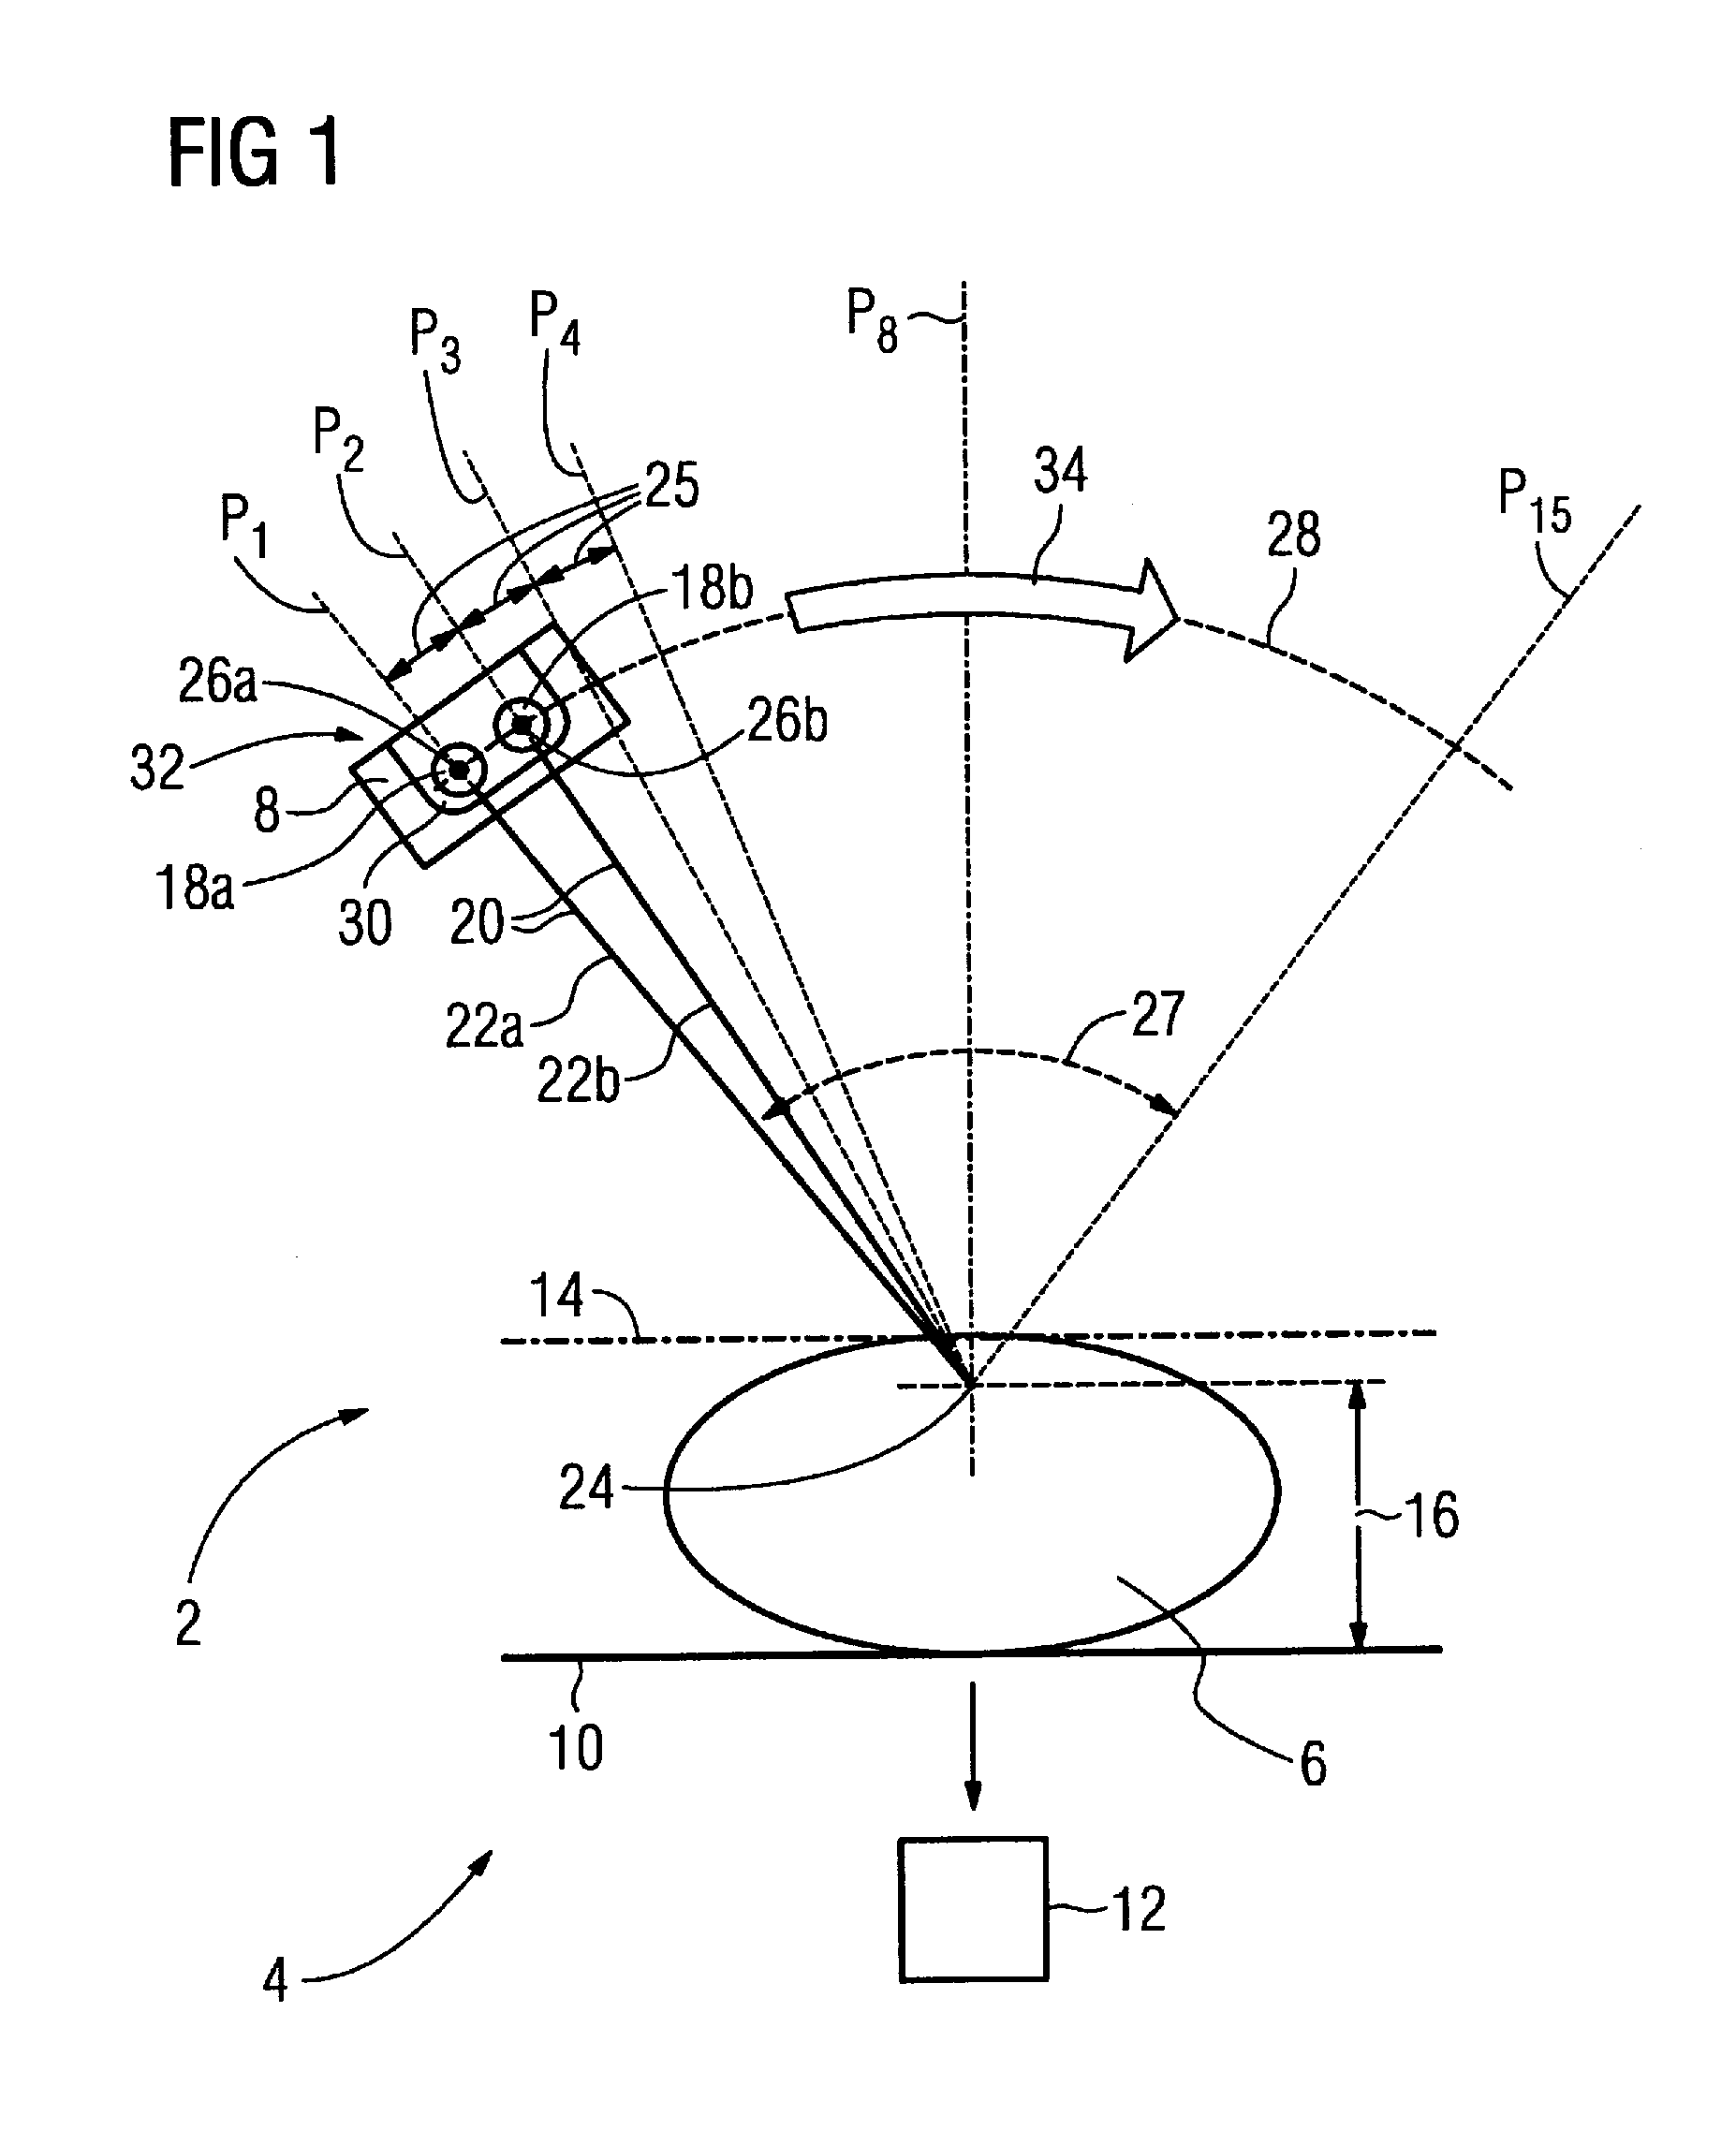 X-ray system and method for tomosynthetic scanning